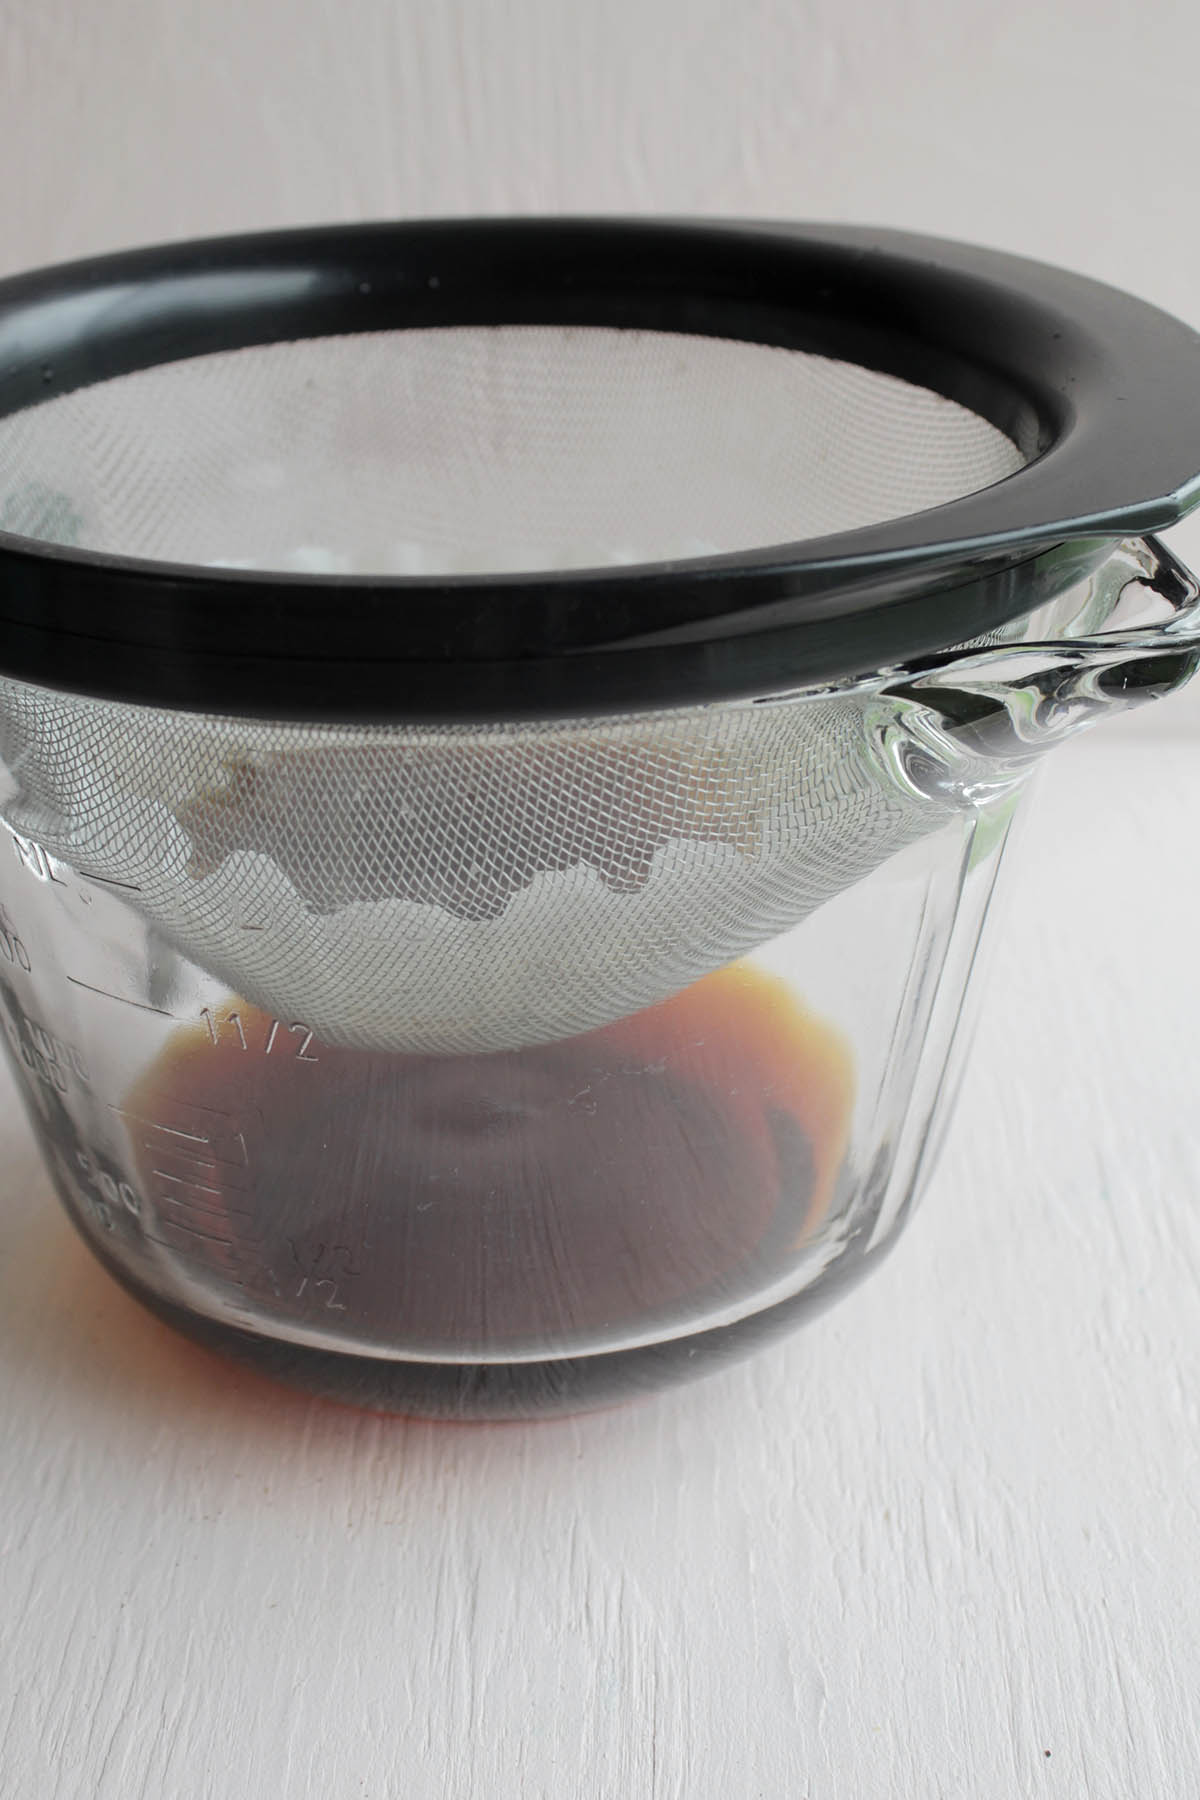 cold brew coffee draining into glass measuring cup.